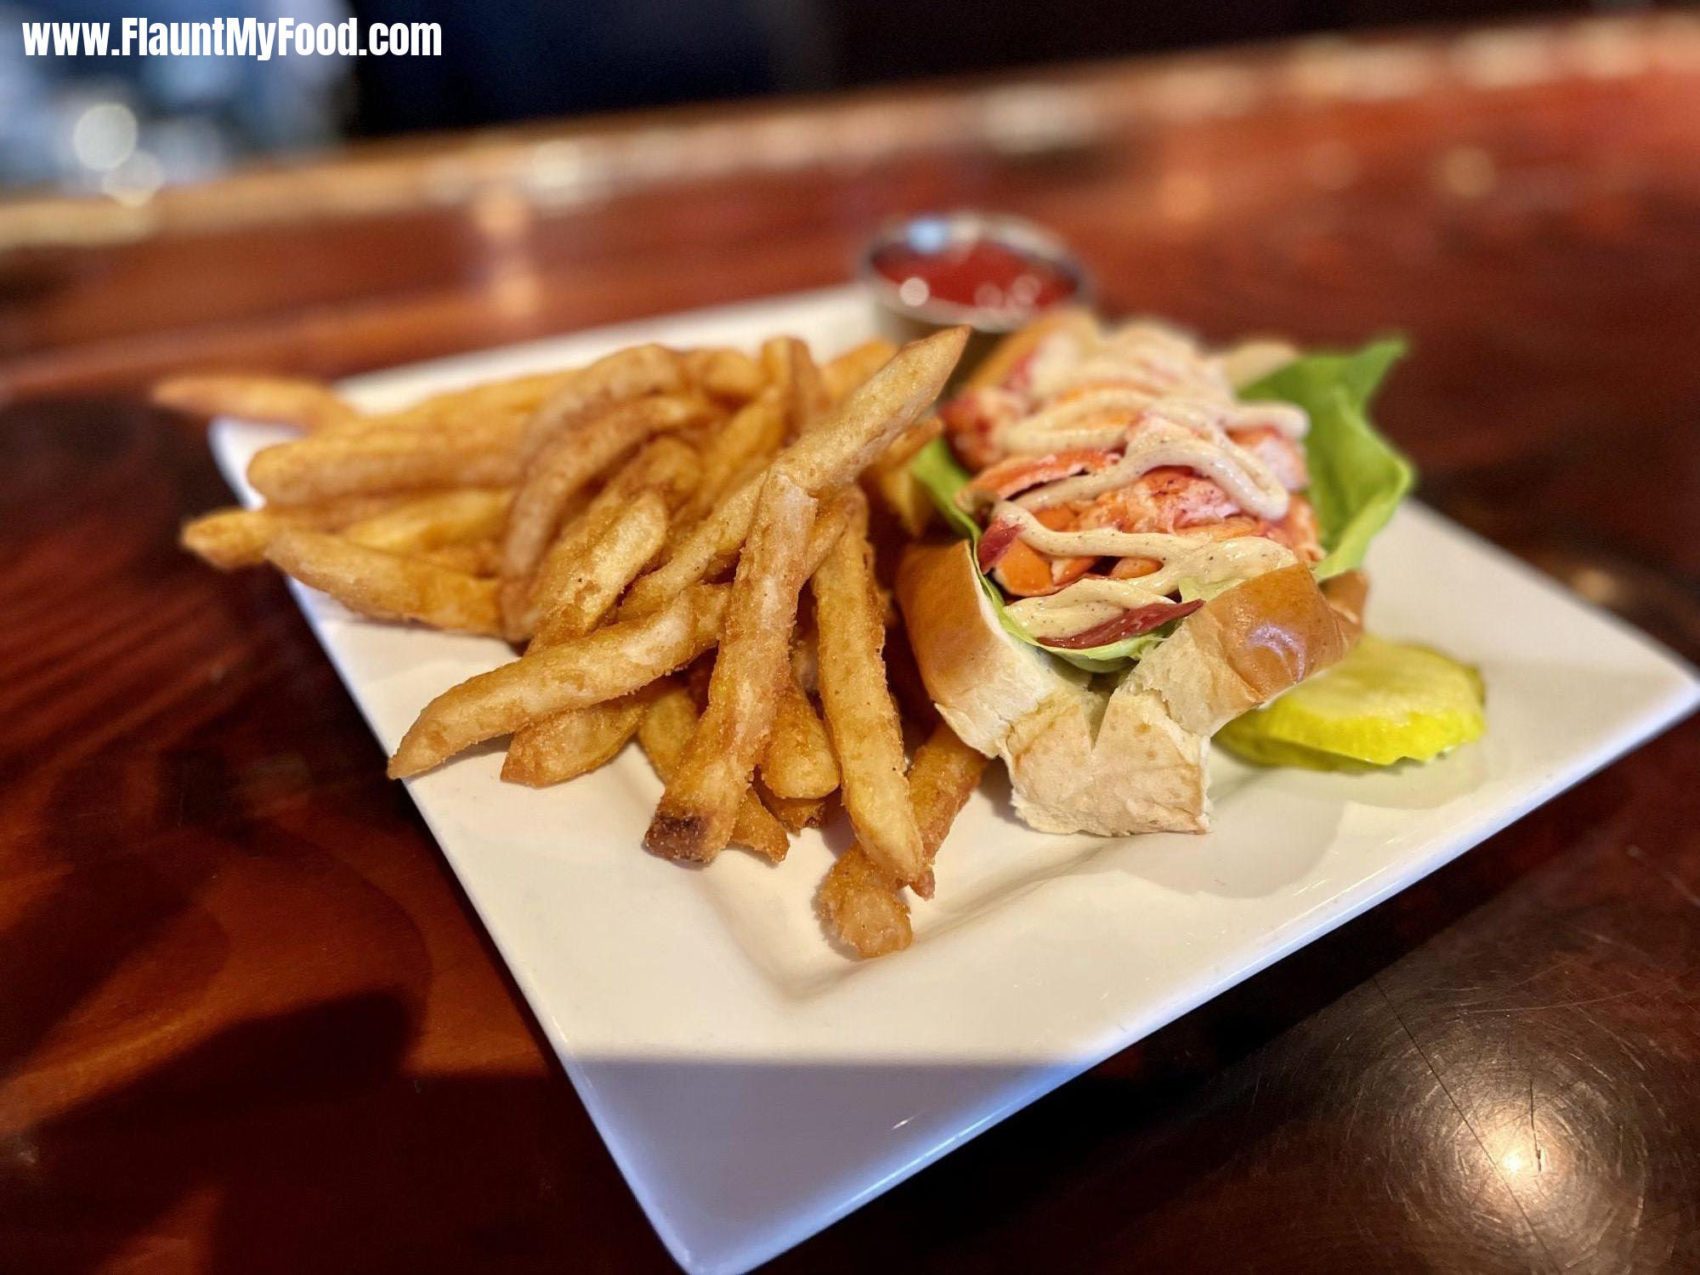 Lobster roll with french fries at DiMillo’s Portland Maine